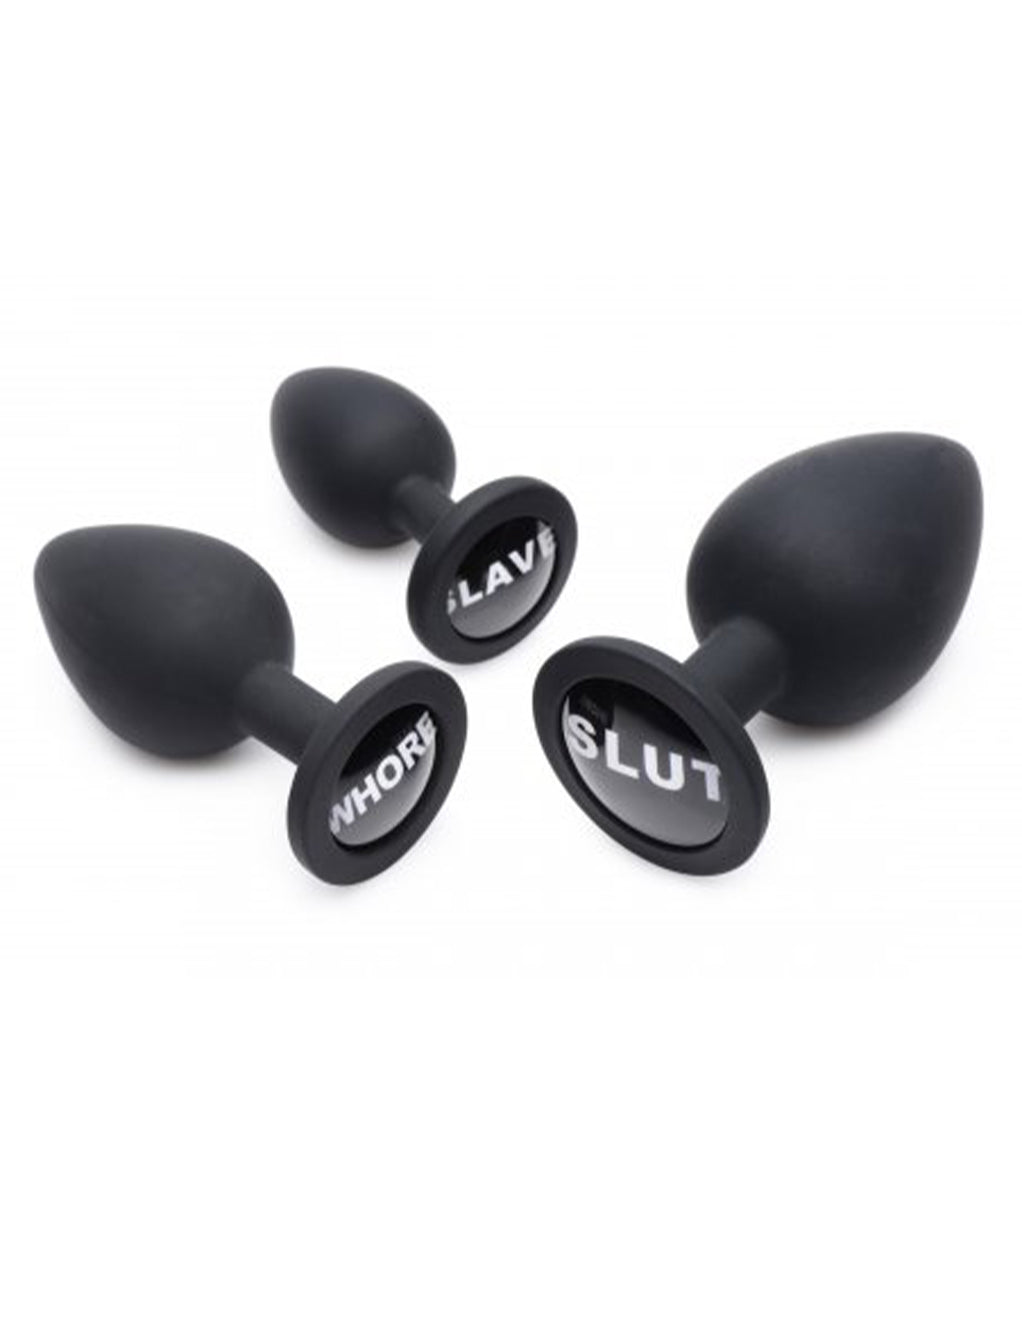 Dirty Words Anal Plug Set- Front